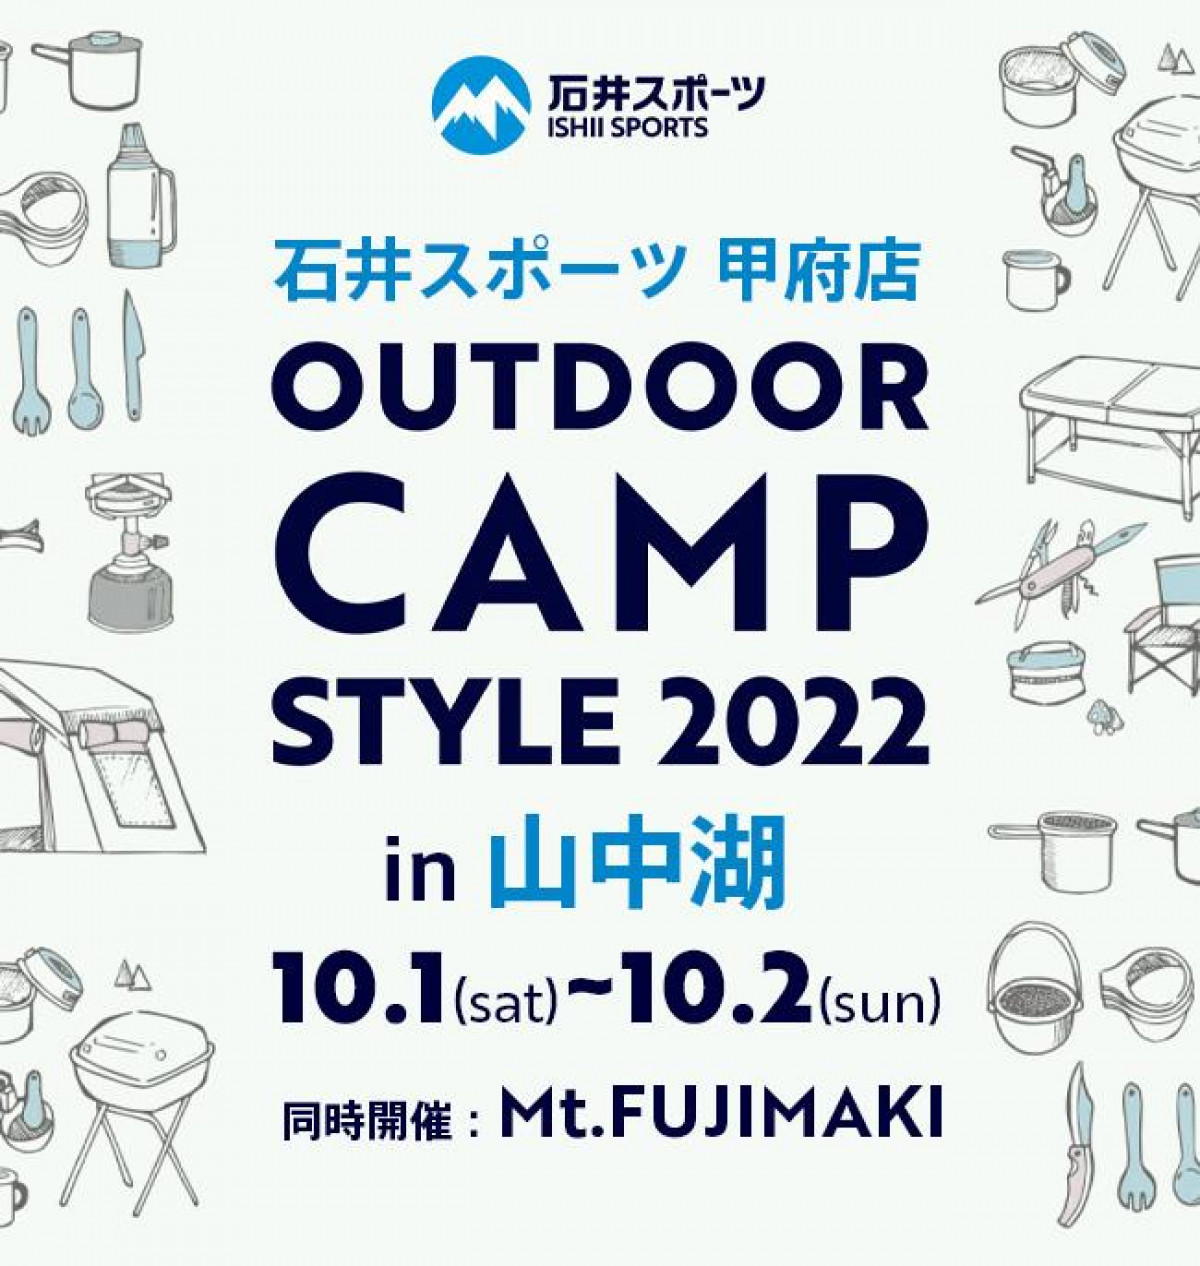 Outdoor Camp Style 2022 in 山中湖 出展致します！